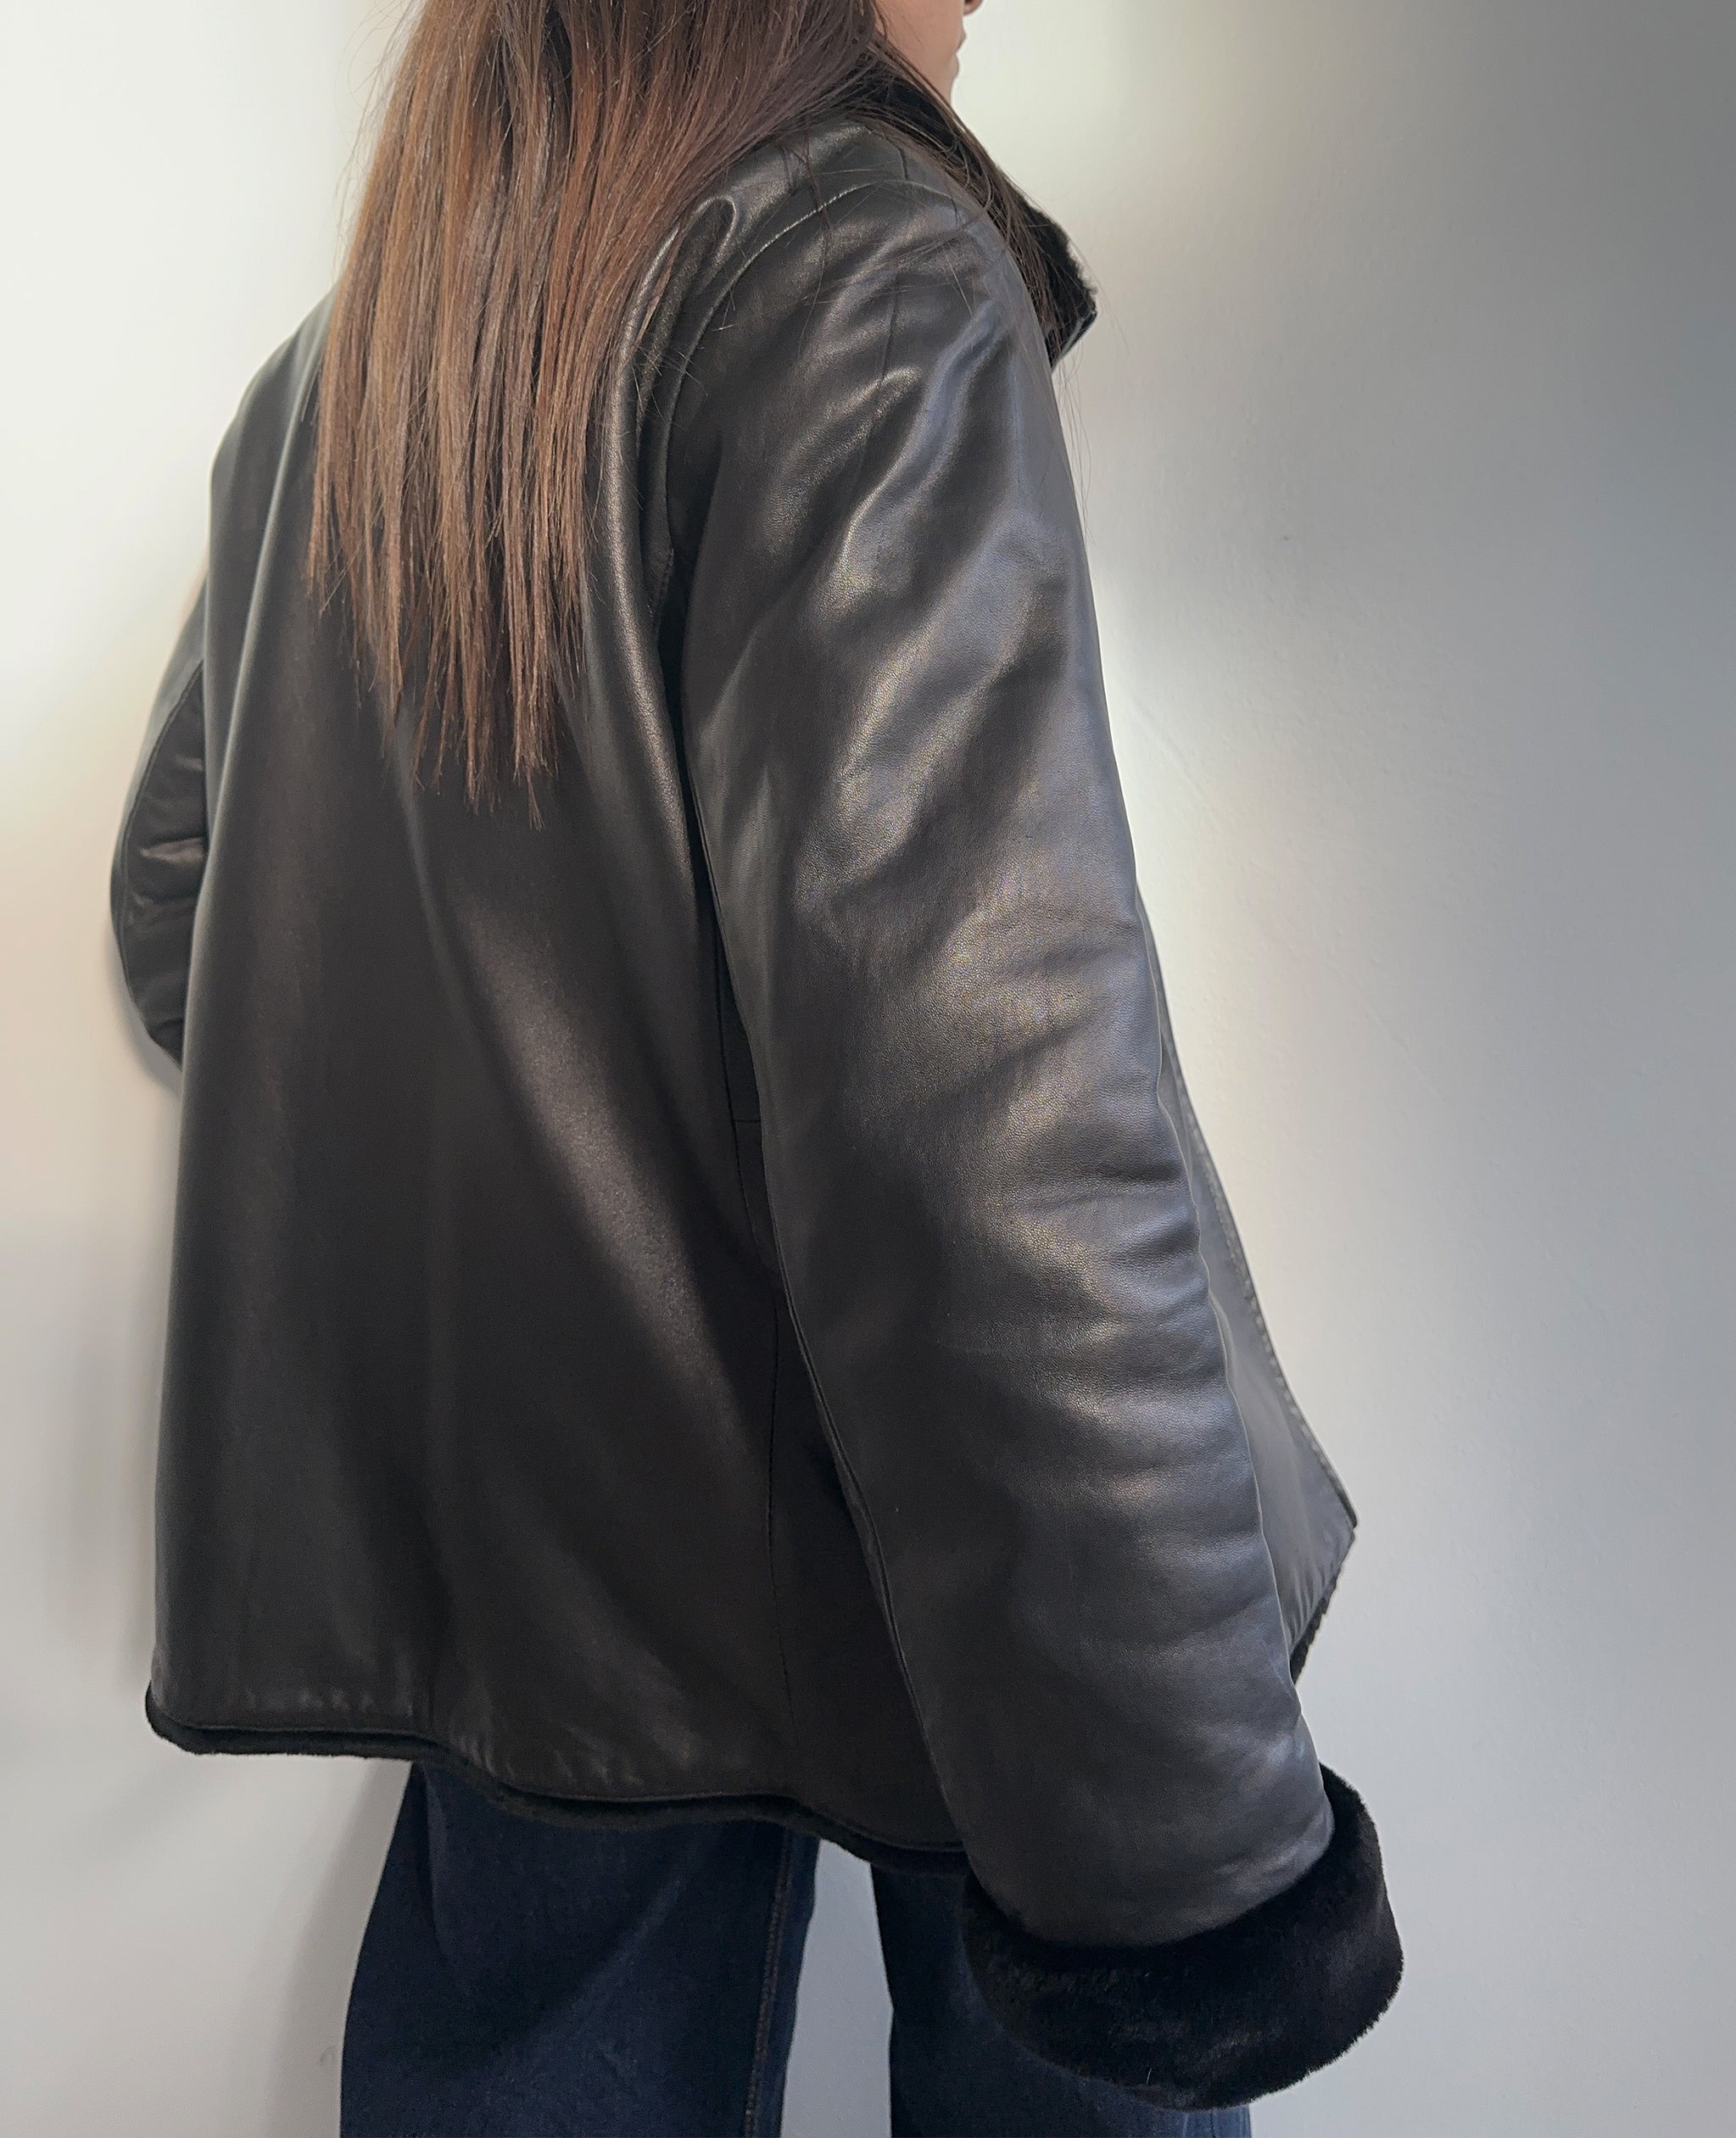 Black Leather Jacket With Faux Fur Collar and Cuffs